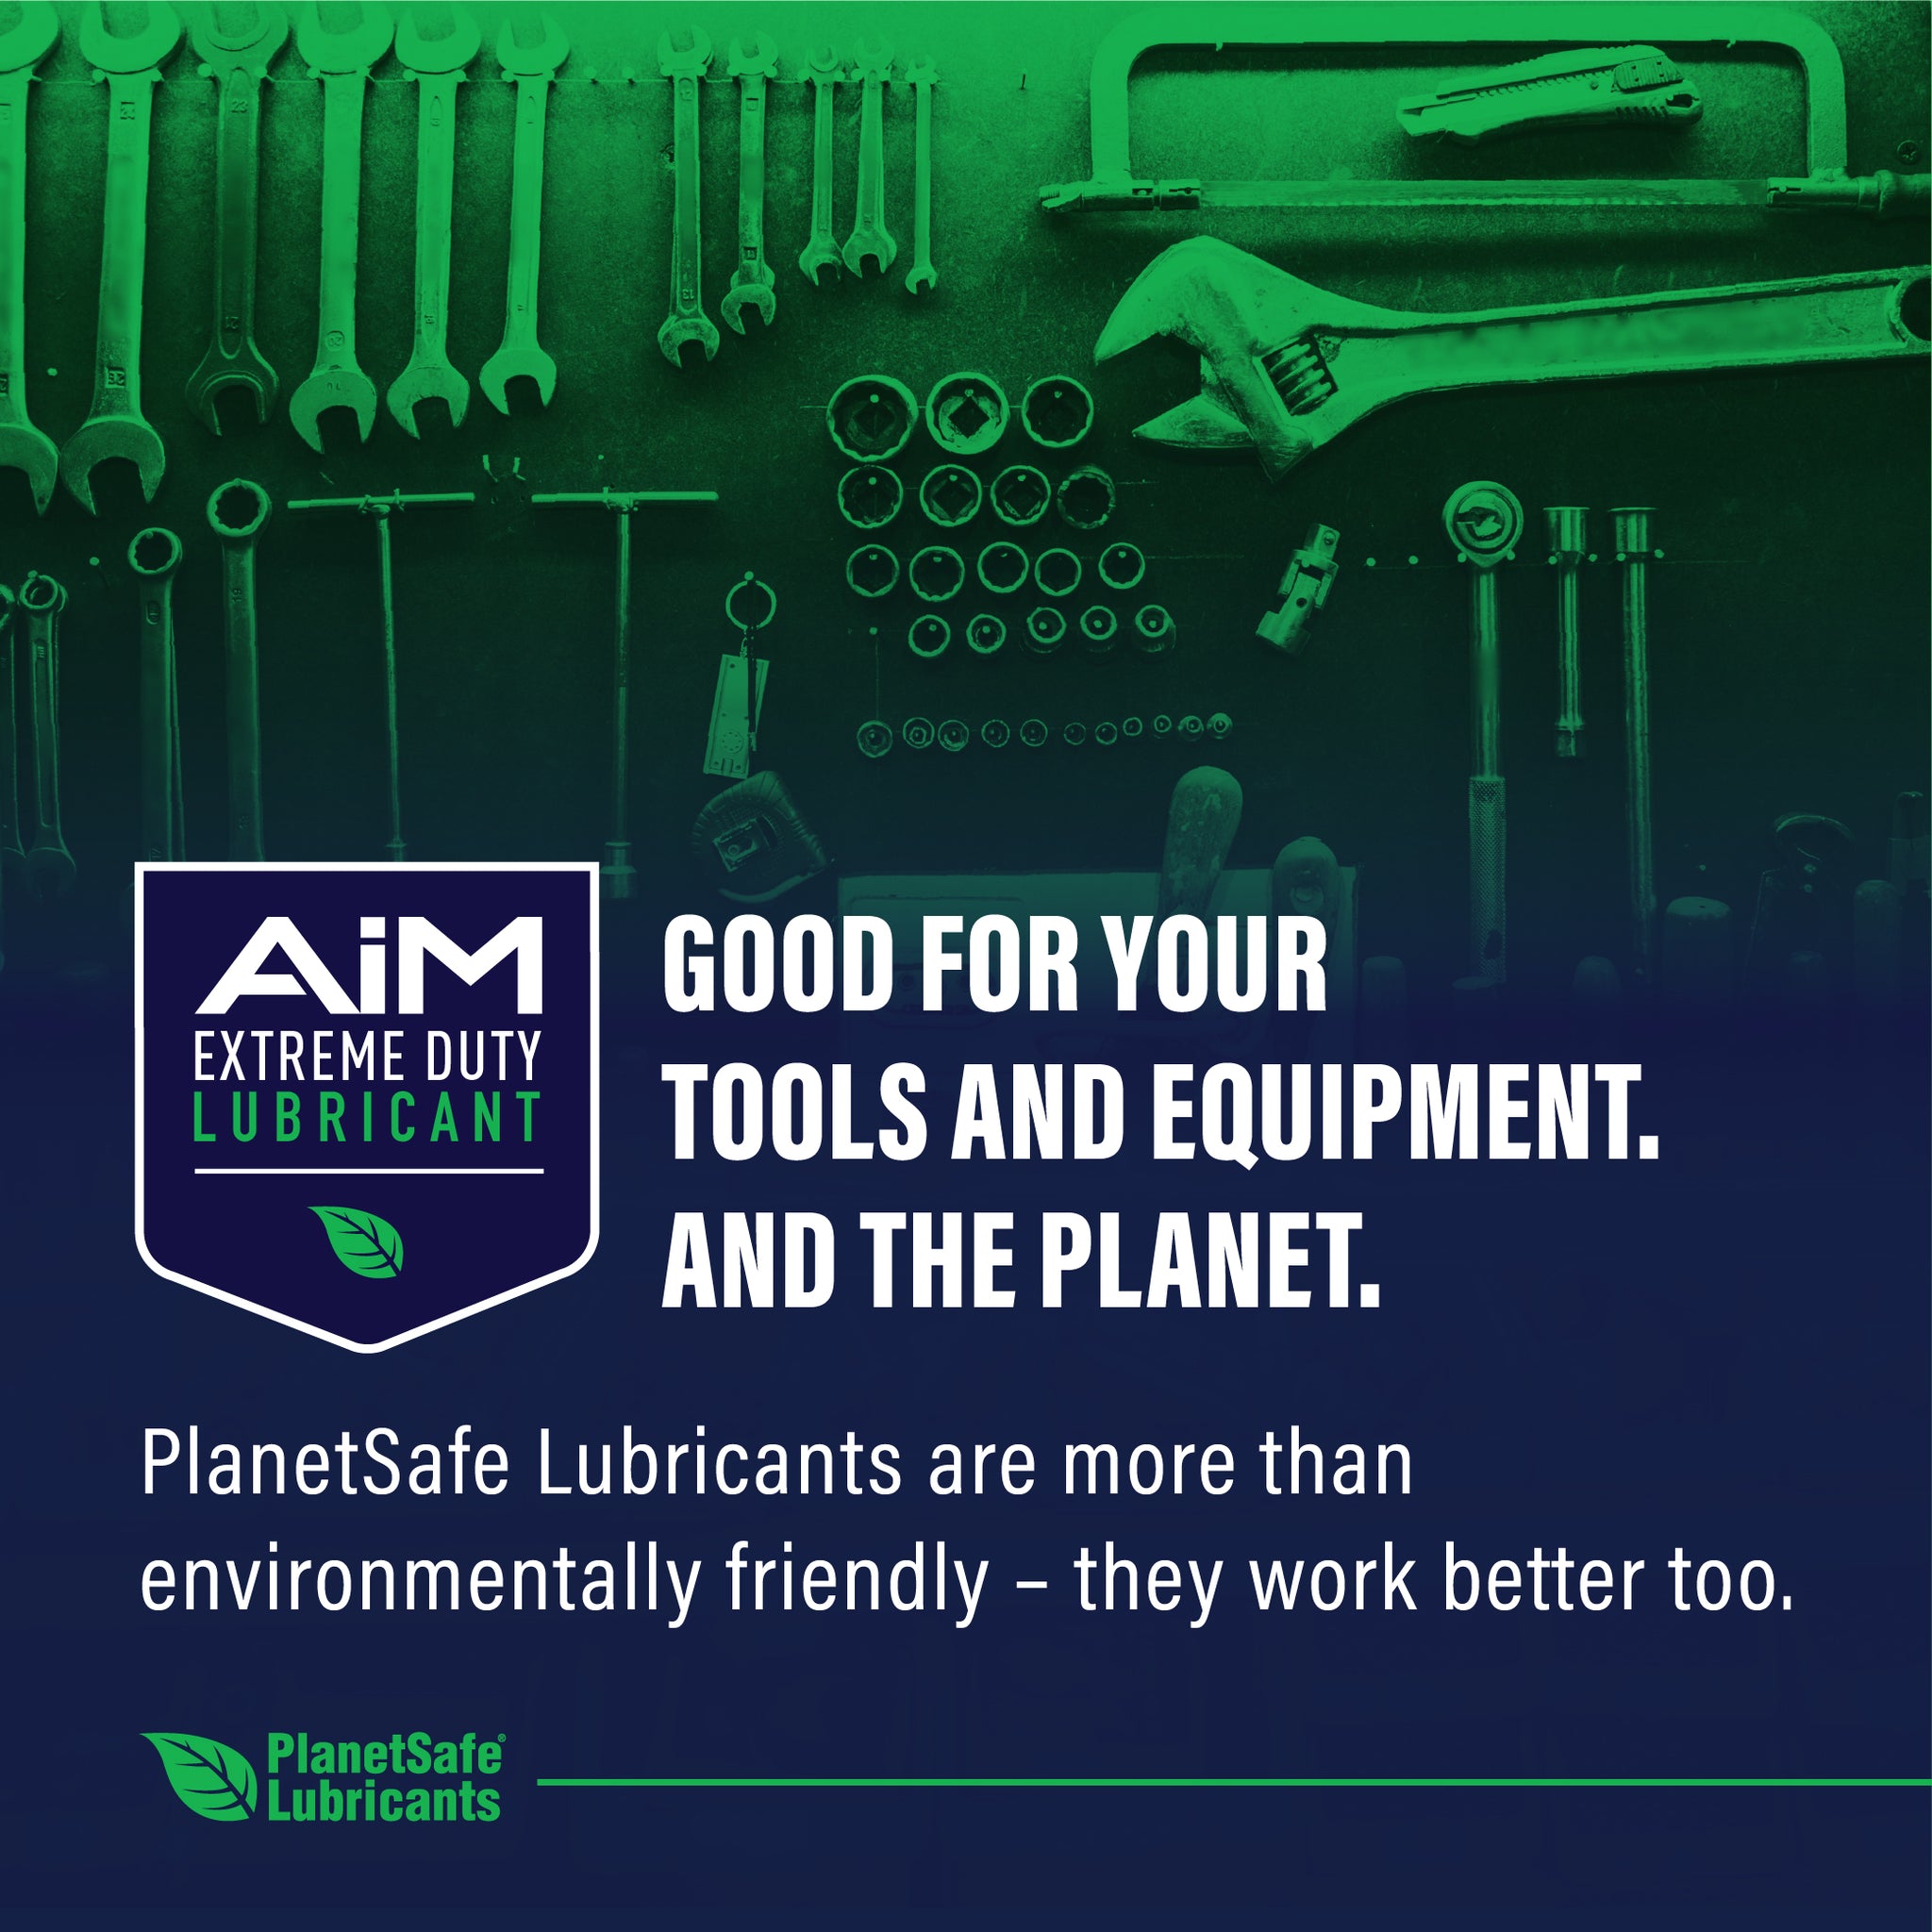 PlanetSafe AIM Extreme Duty Lubricant - Worlds best all purpose lube - home repair auto - non-toxic -rust removal- for tools chains hinges metal- best wd-40 substitute